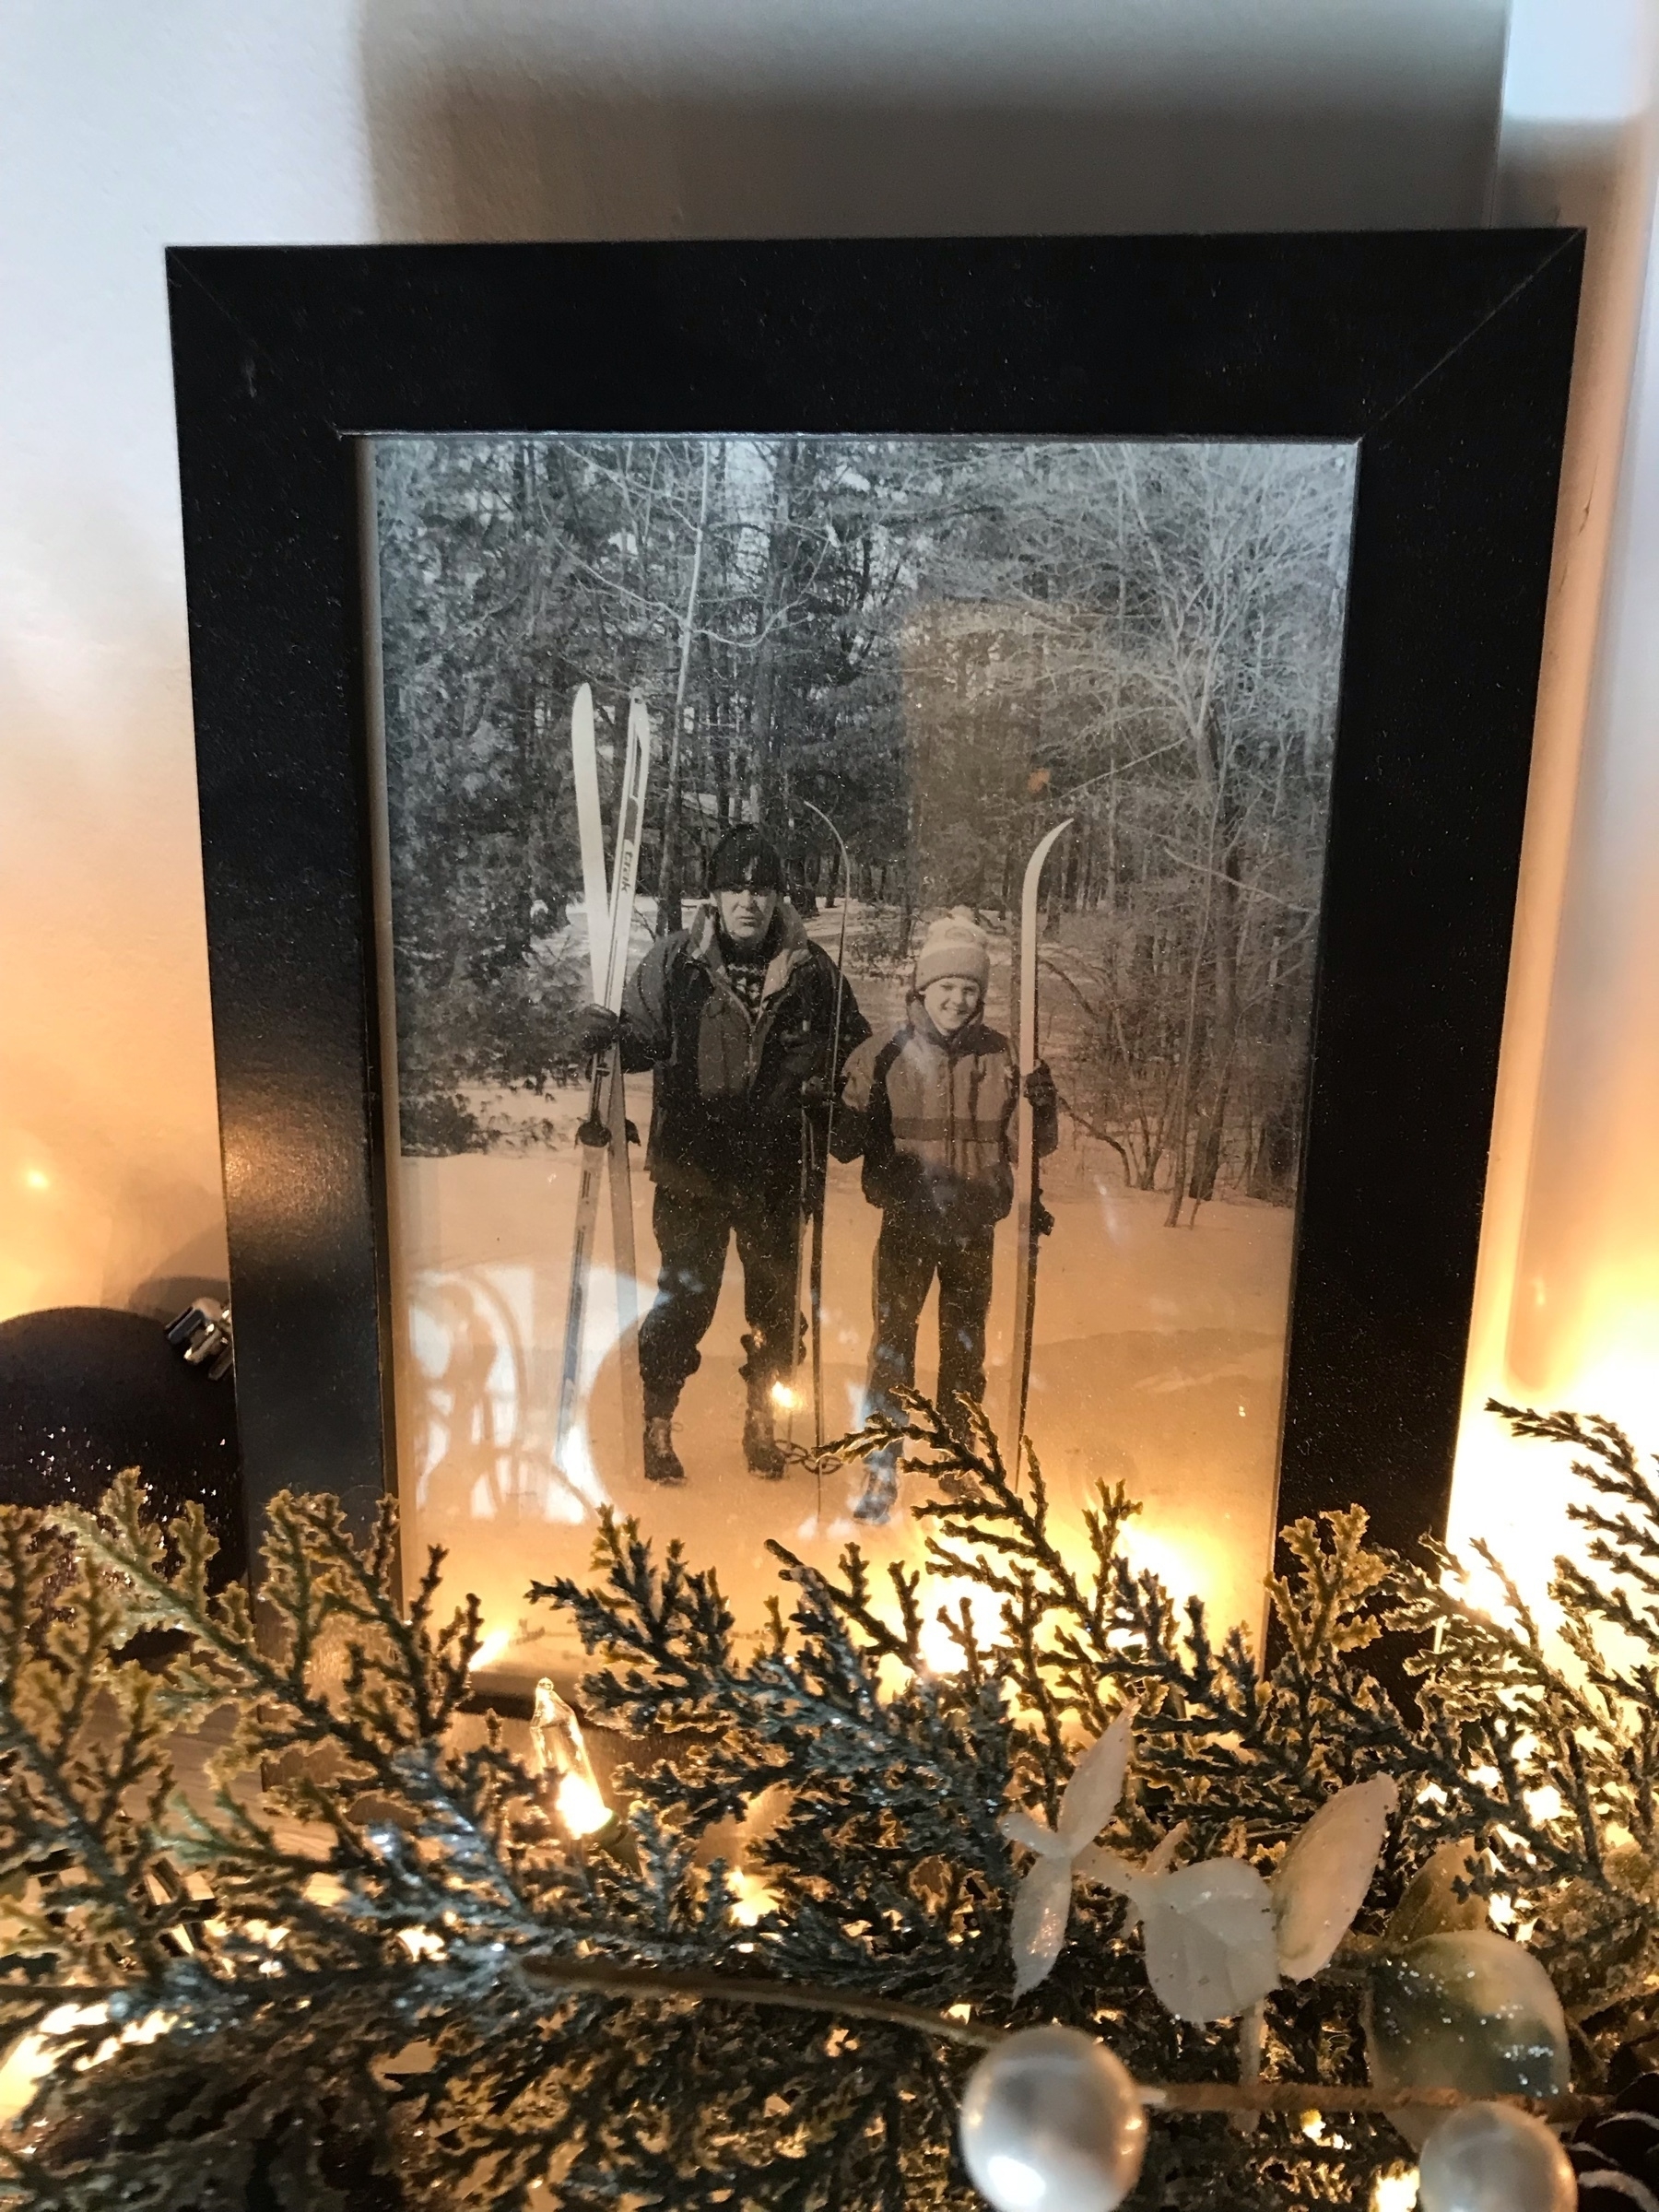 Picture of a framed photo of my dad and I skiing when I was young, taken last Christmas and silhouetted by lights